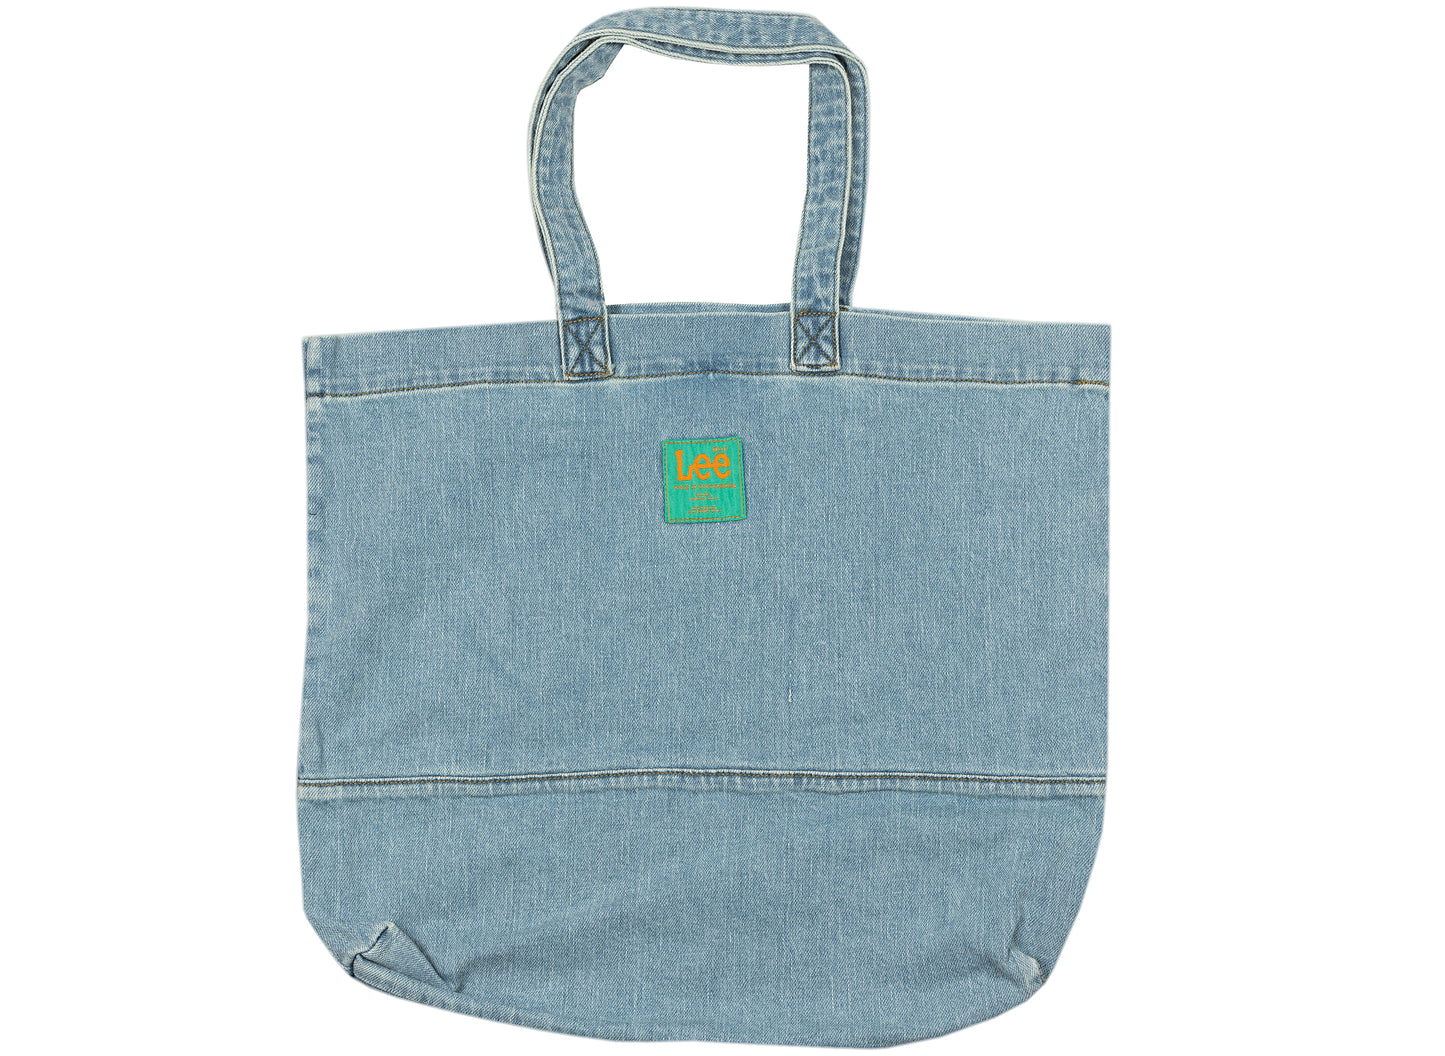 The Hundreds x Lee Jeans Tote Bag